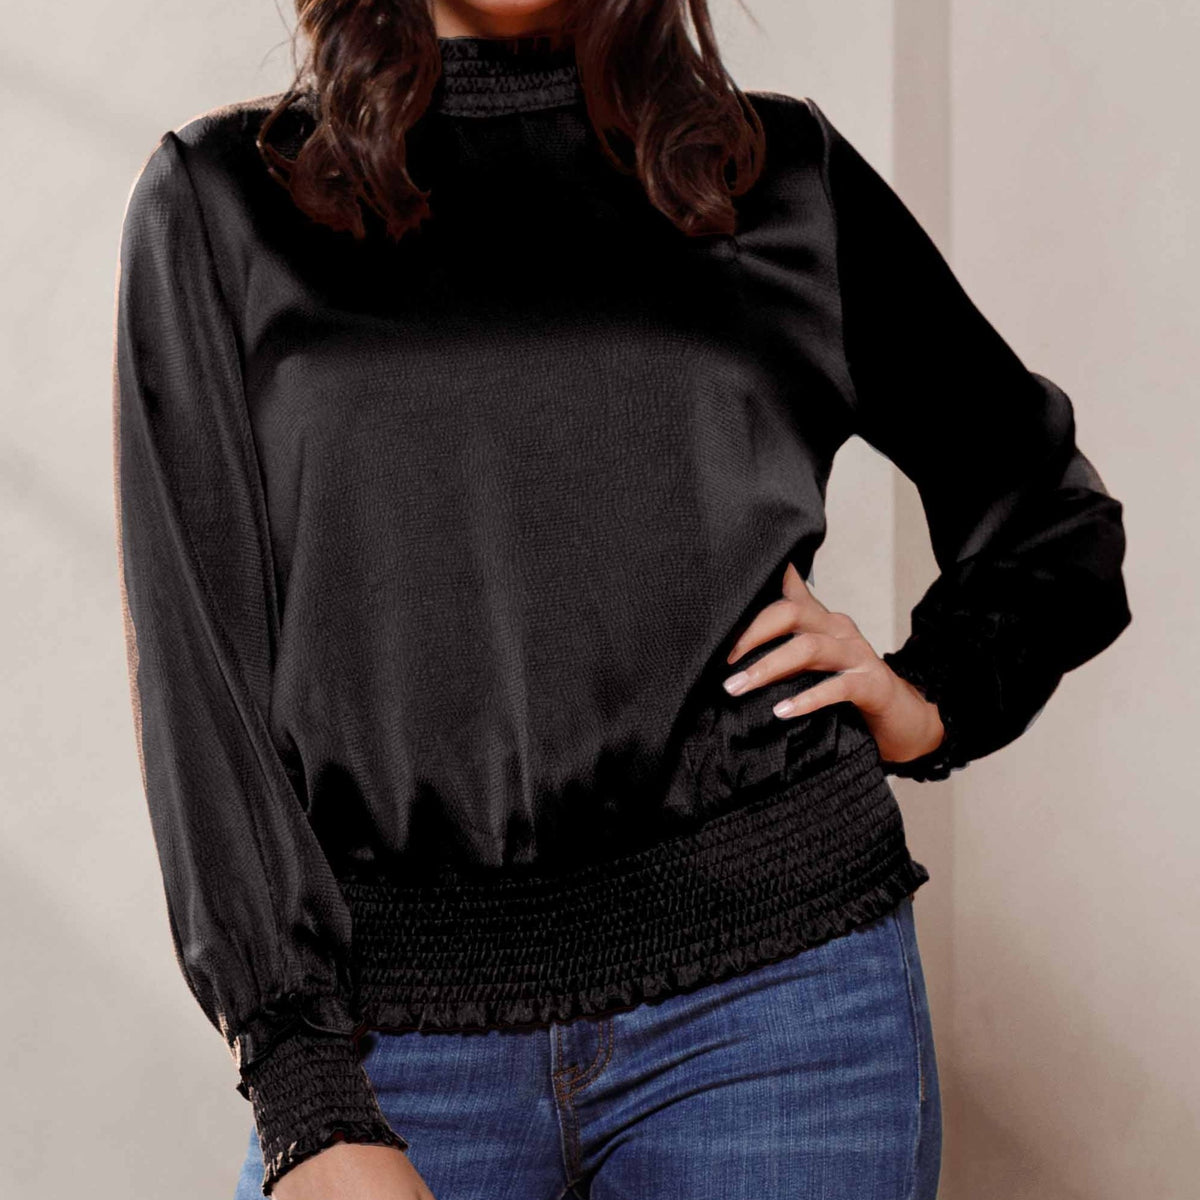 Solid Black Long Sleeve Mock Neck Blouse (Available in Regular and Plus Sizes)